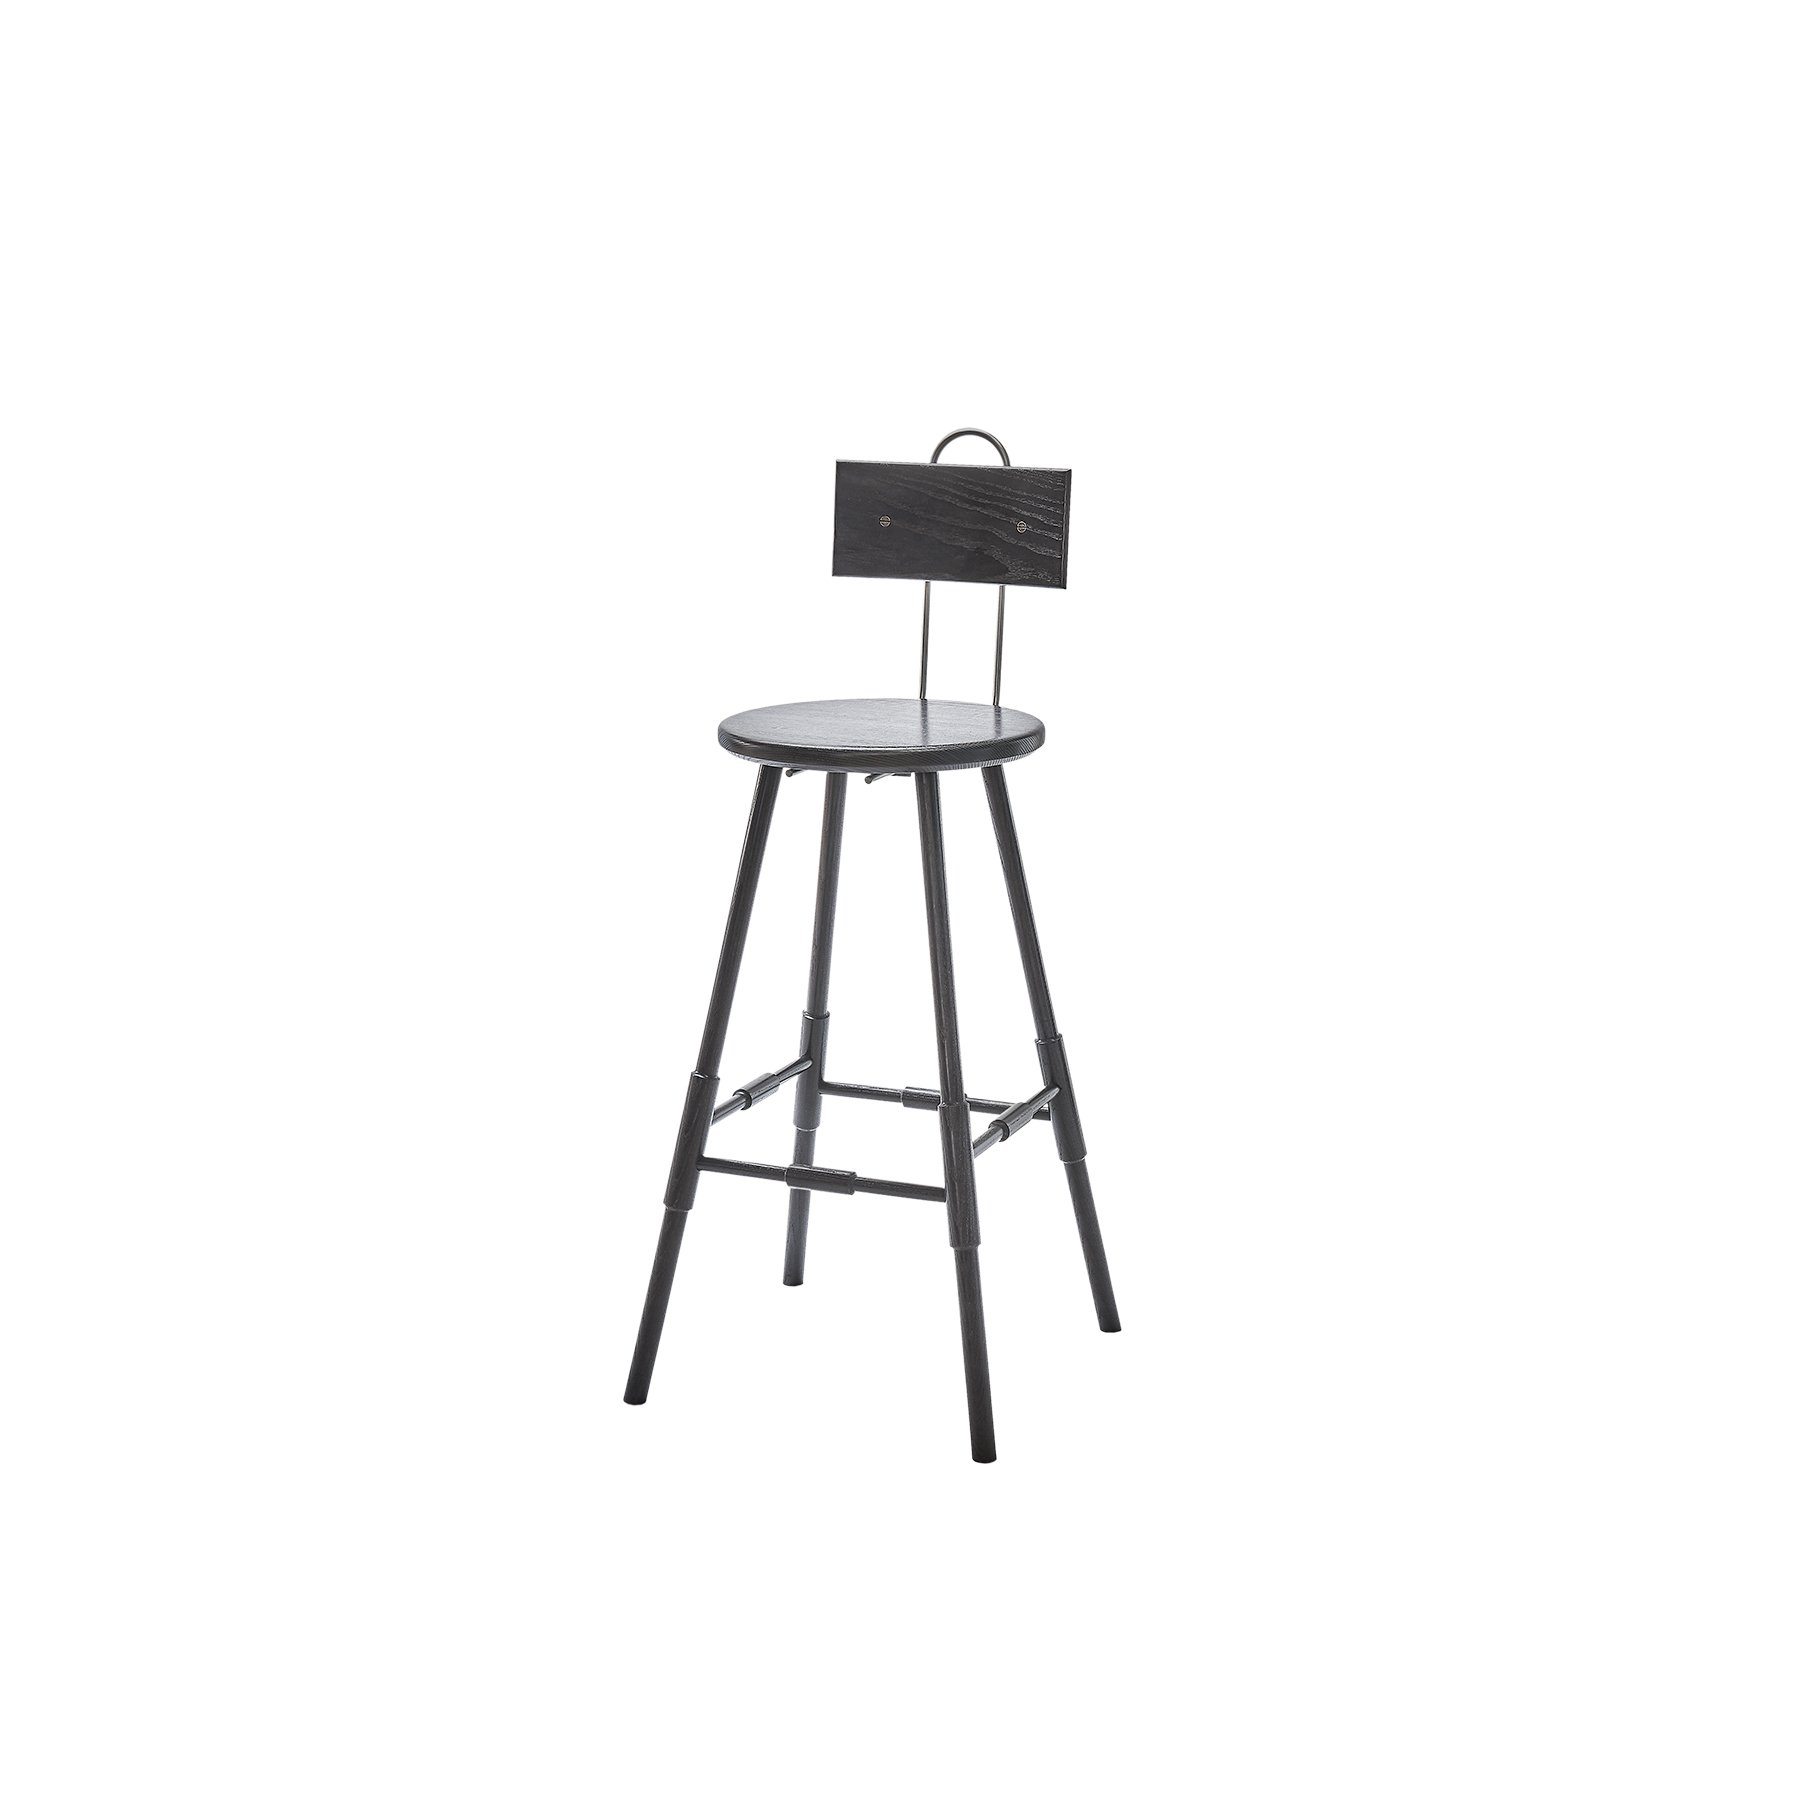 ATLANTIC STOOL WITH BACK 29" - $1,208